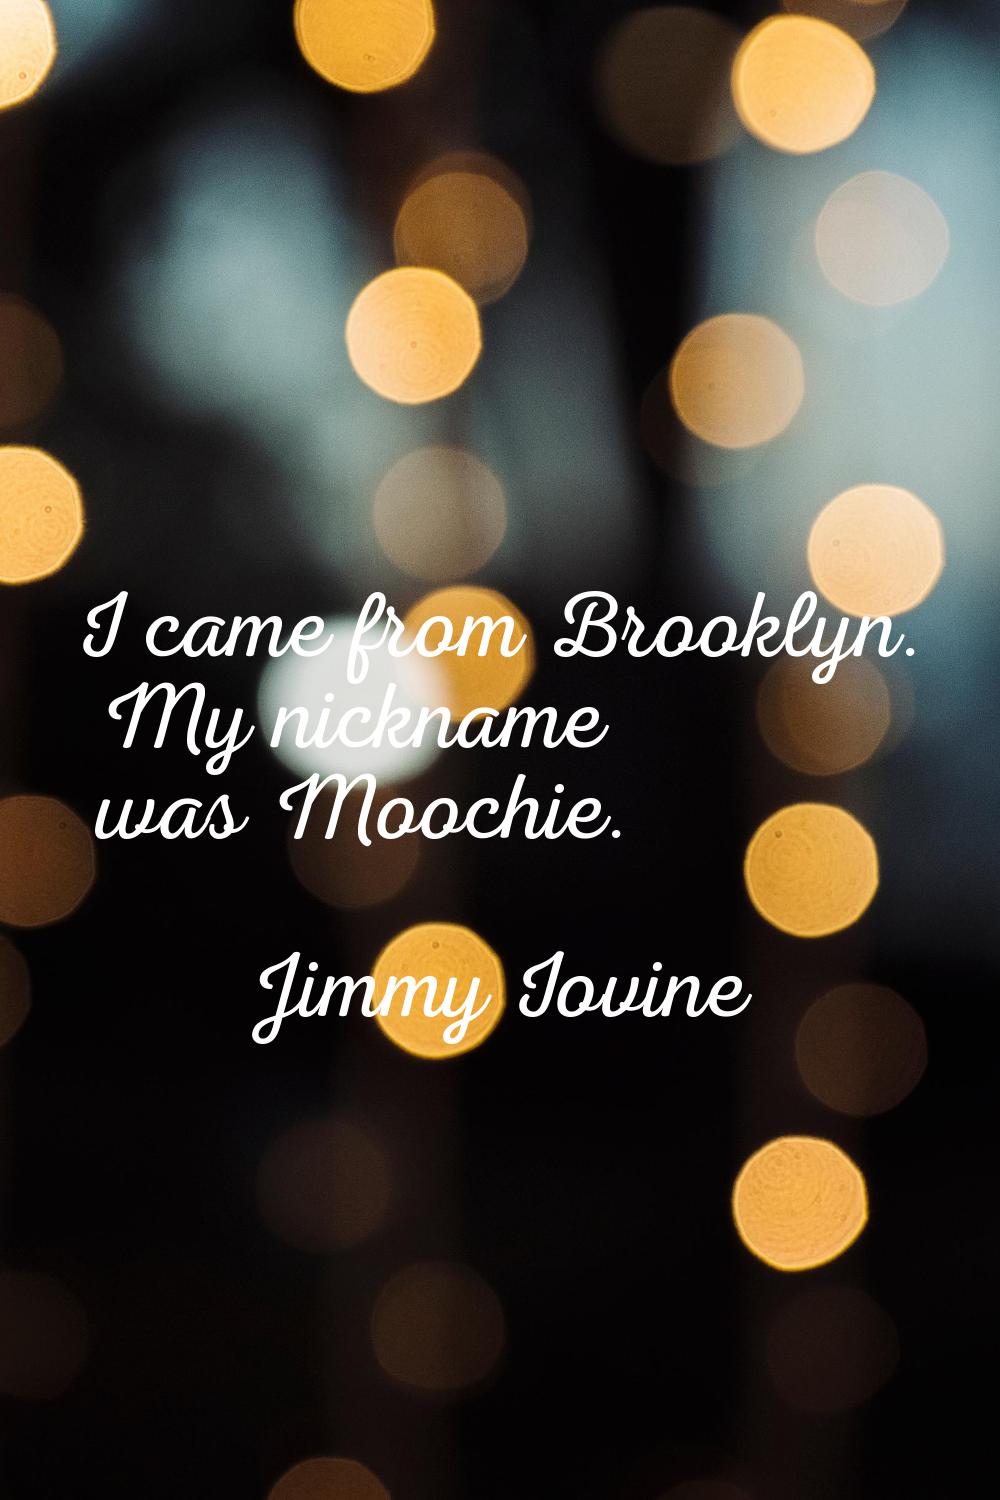 I came from Brooklyn. My nickname was Moochie.